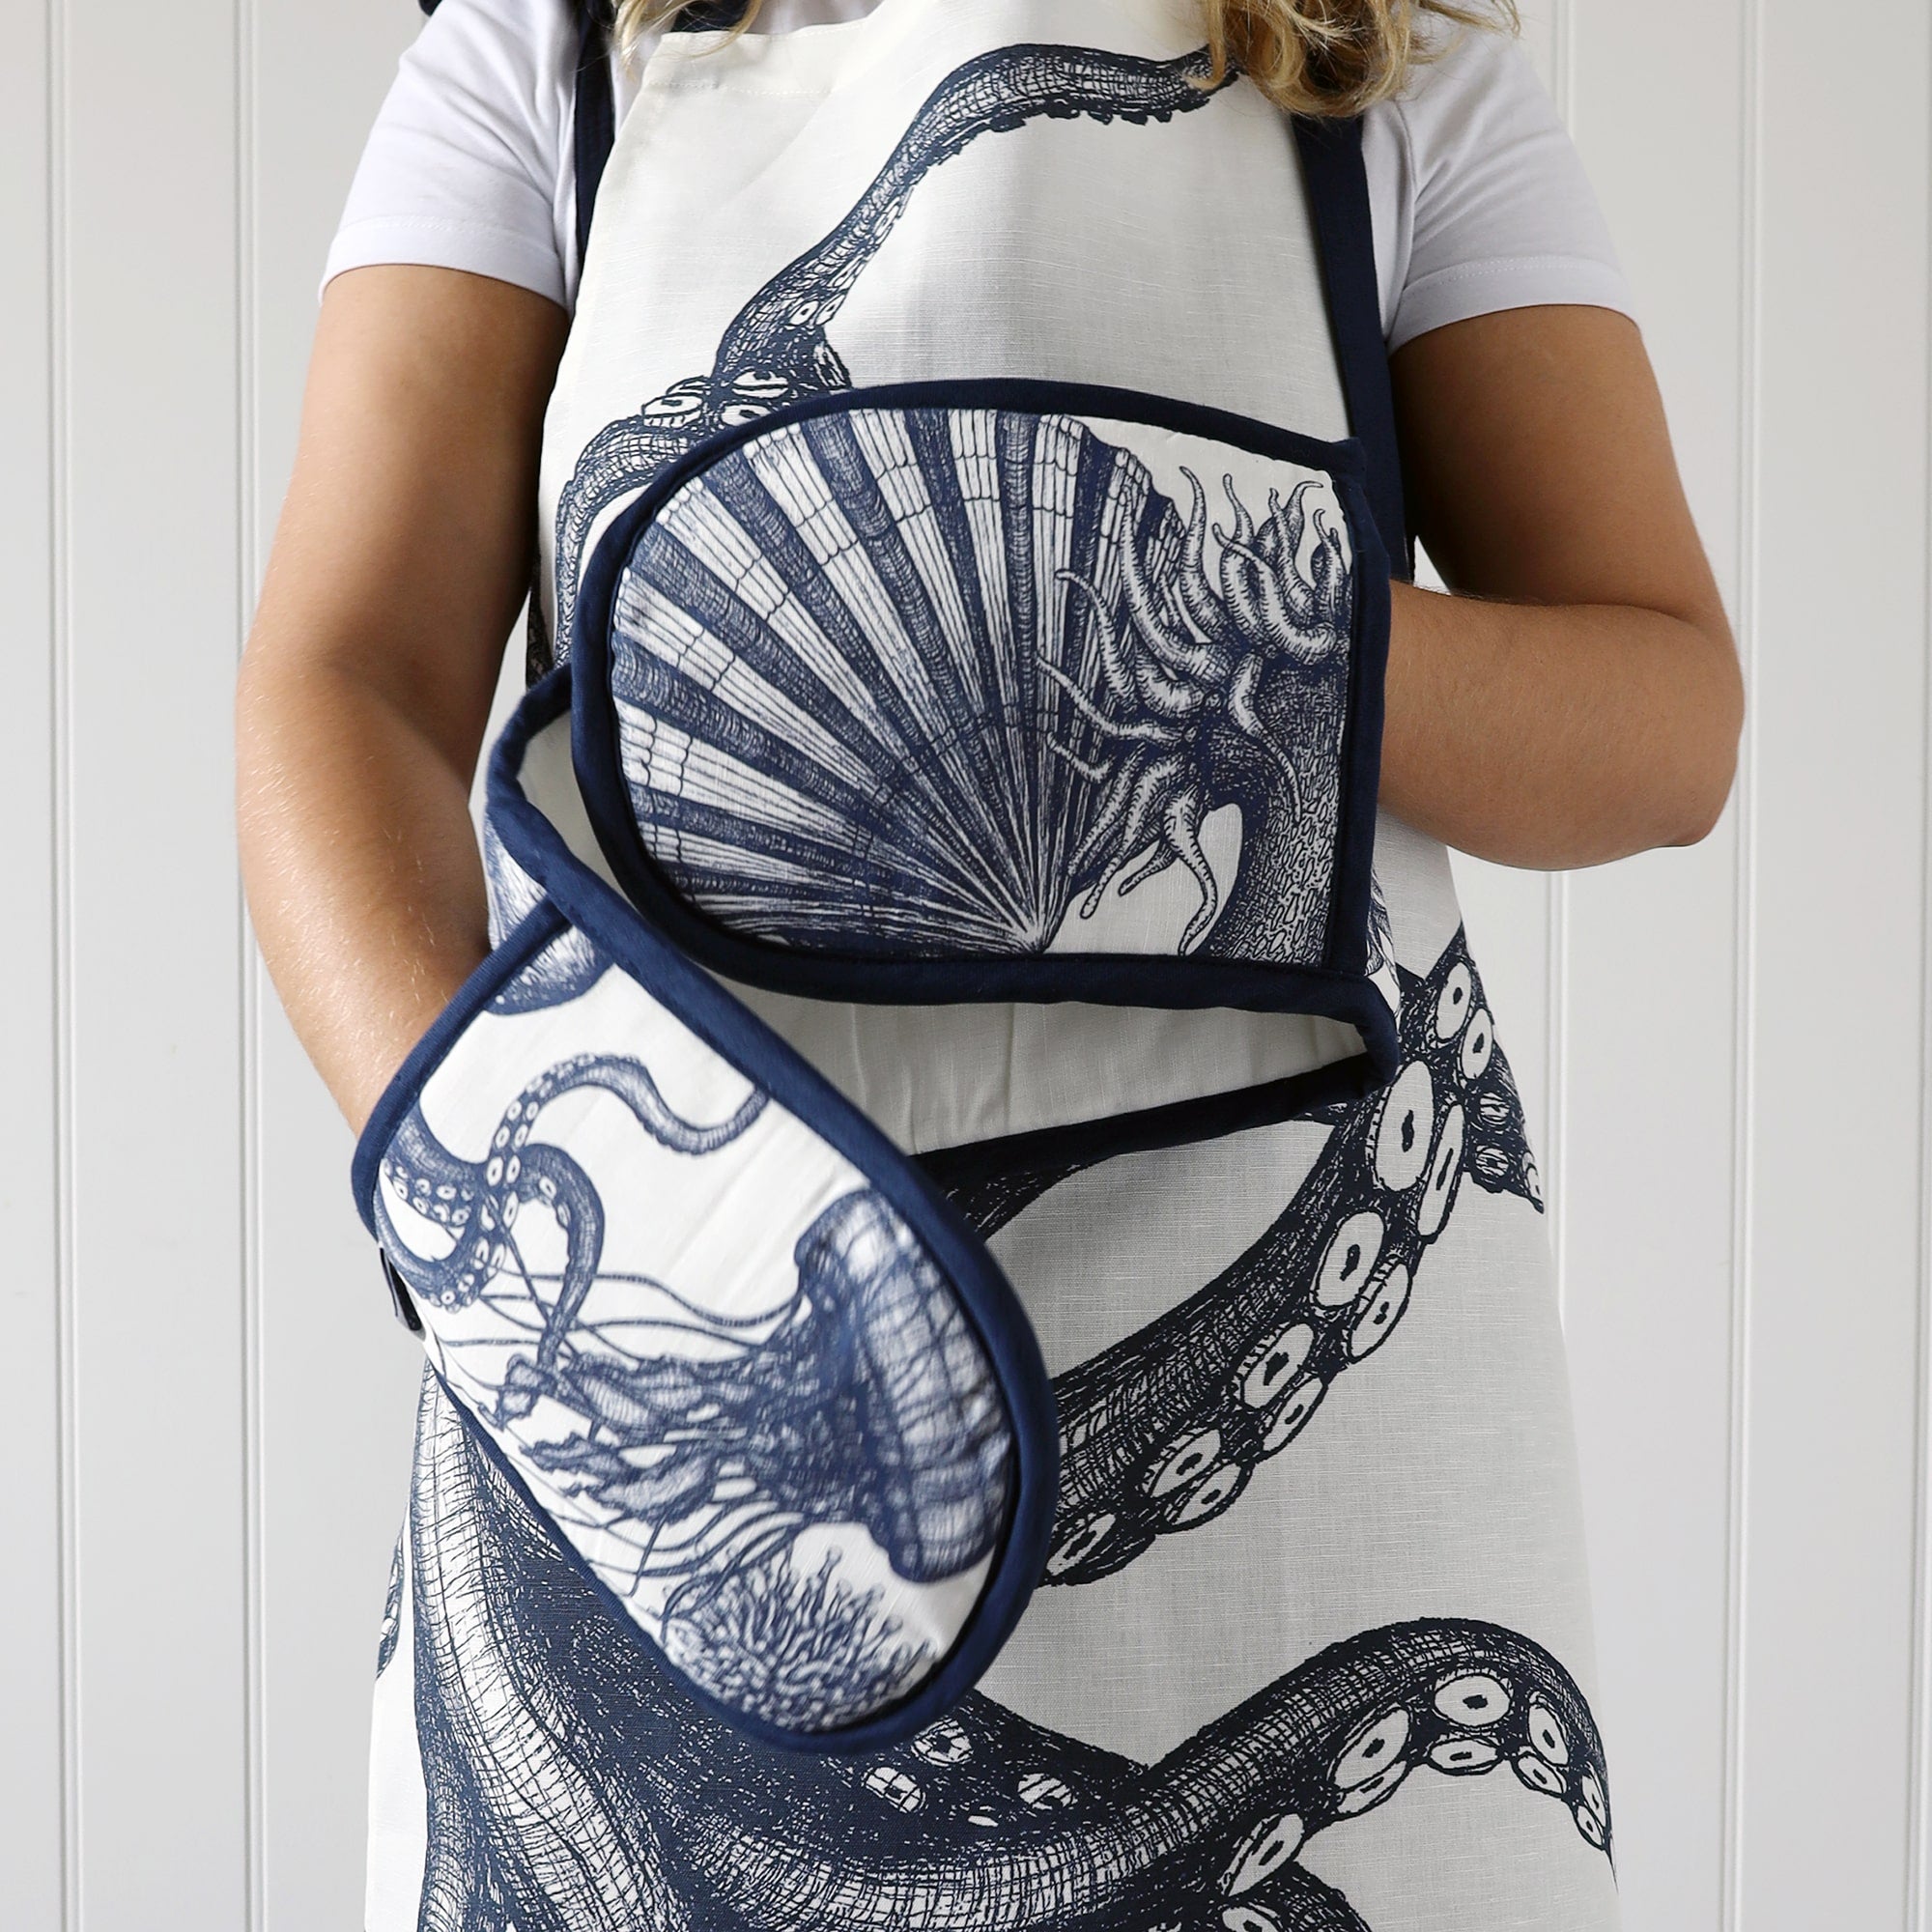 Model wearing our sea creature apron and modelling the matching sea creature gloves